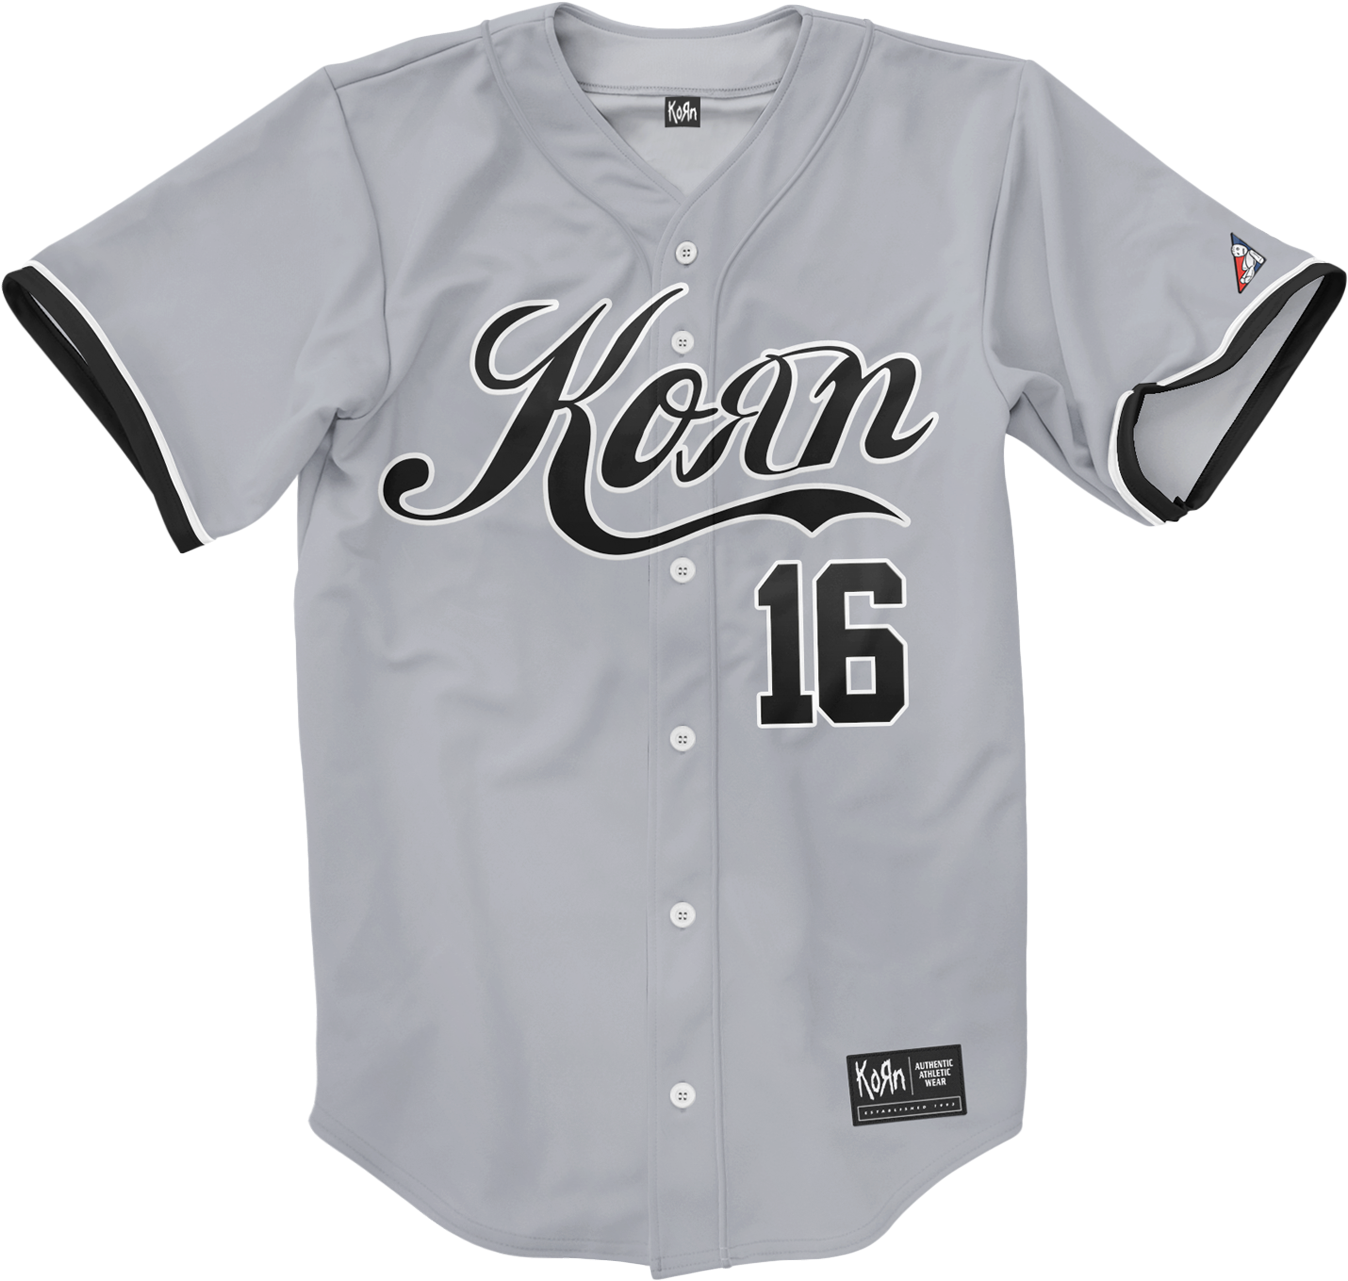 A Grey Baseball Jersey With Black Text